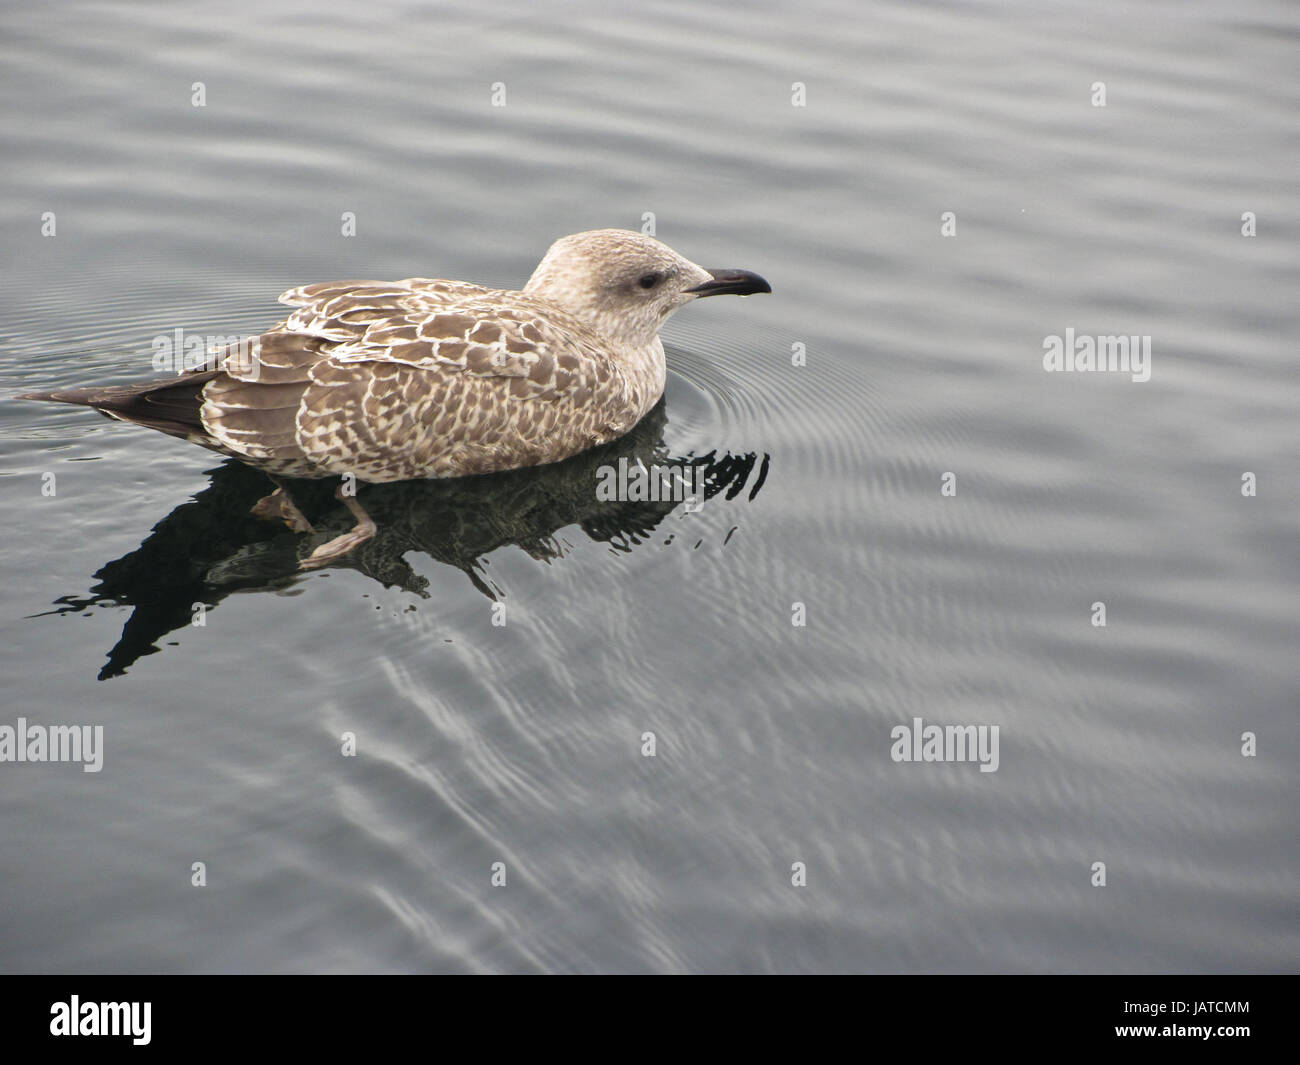 The duck swims on the water Stock Photo